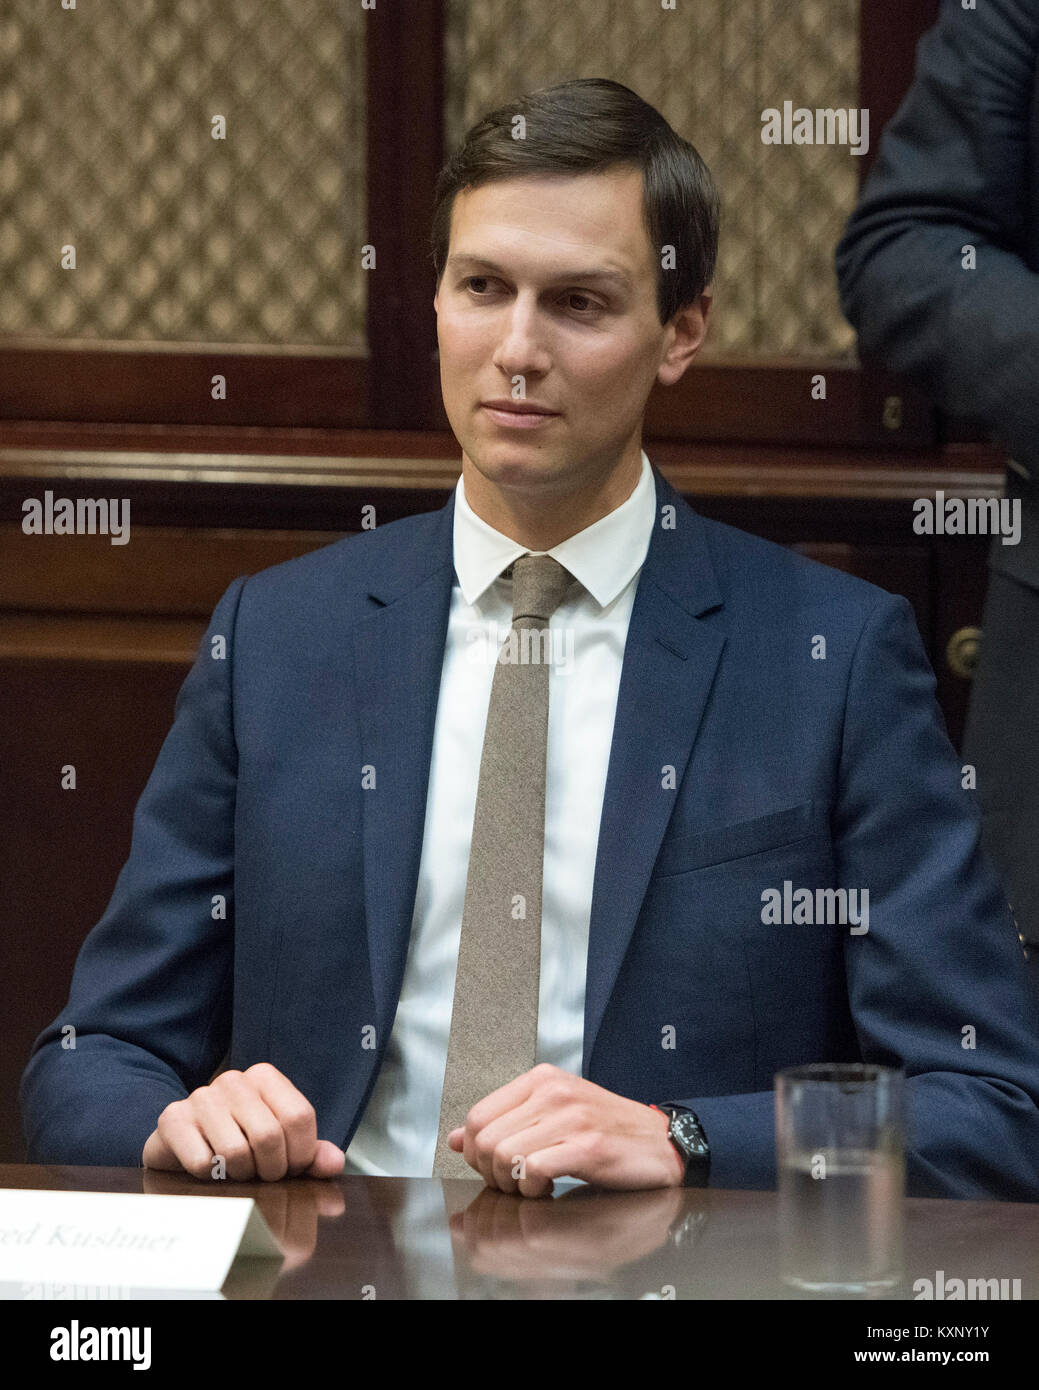 Jared Kushner, Senior Advisor to the President, listens as United States President Donald J. Trump leads a prison reform roundtable in the Roosevelt Room of the White House in Washington, DC on Thursday, January 11, 2018. Credit: Ron Sachs/CNP /MediaPunch Stock Photo